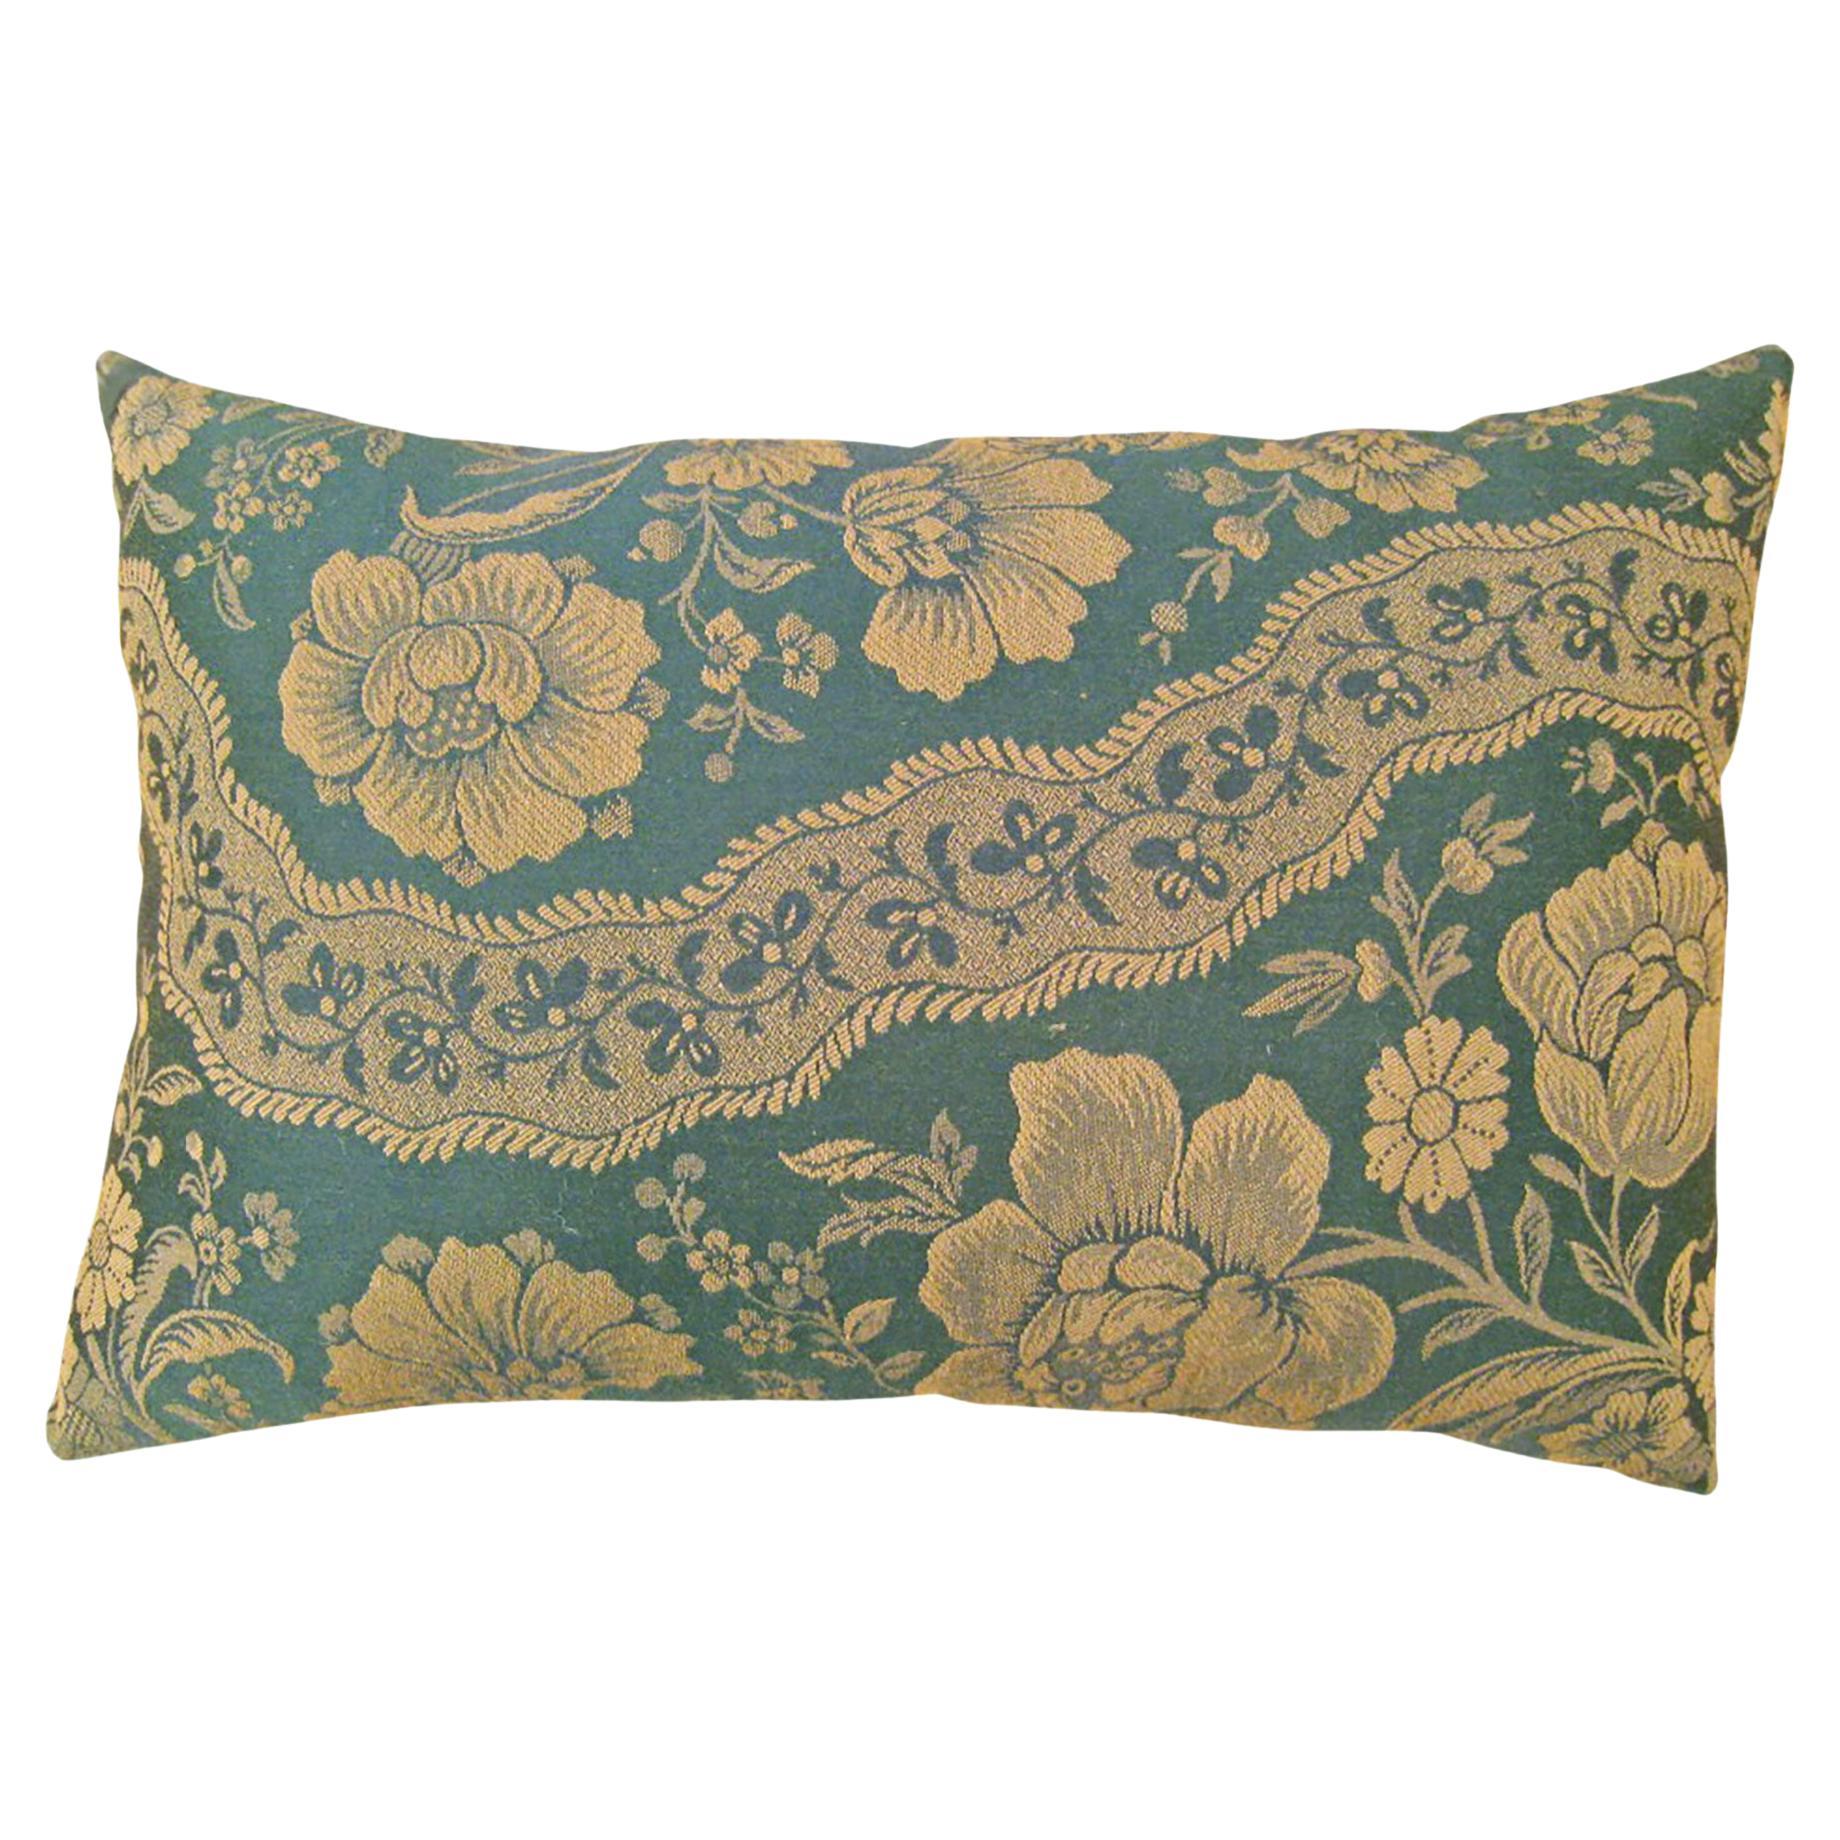 Decorative Vintage European Chinoiserie Fabric Pillow with Floral Design